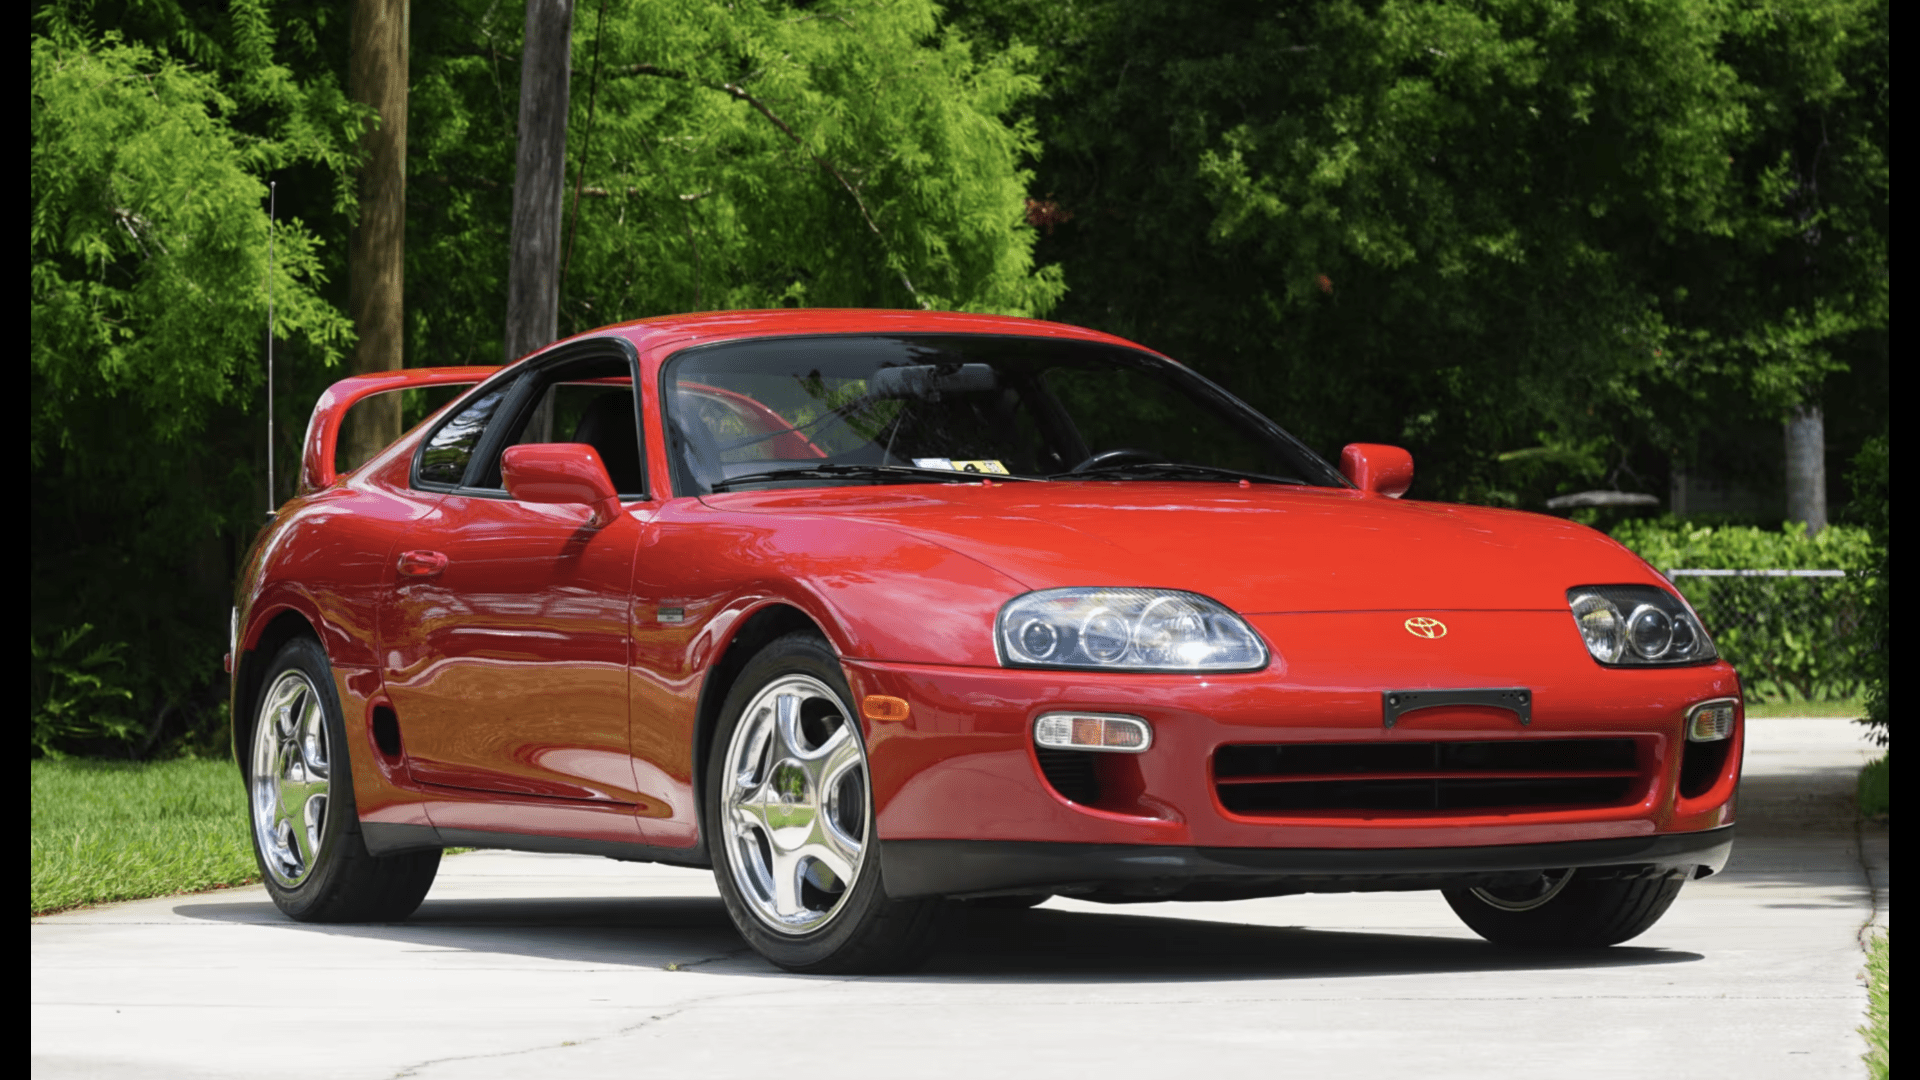 1997 Toyota Supra Turbo 15th Anniversary Coupe to be Auctioned at Mecum